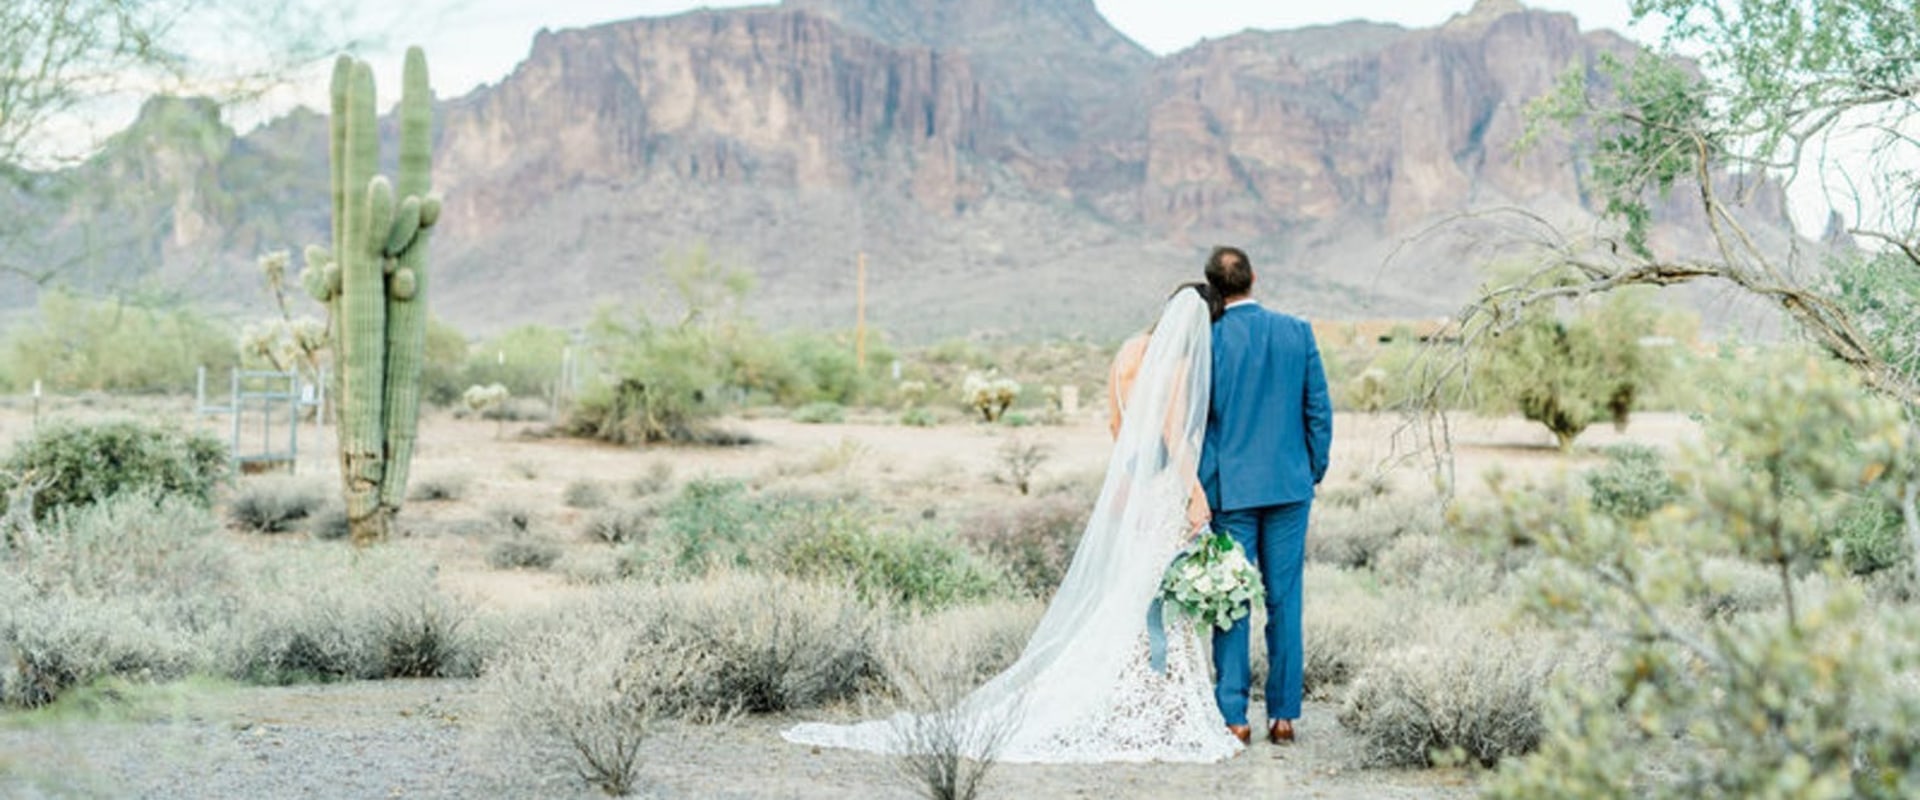 All About Desert and Mountain Themes: Perfect for Arizona Weddings